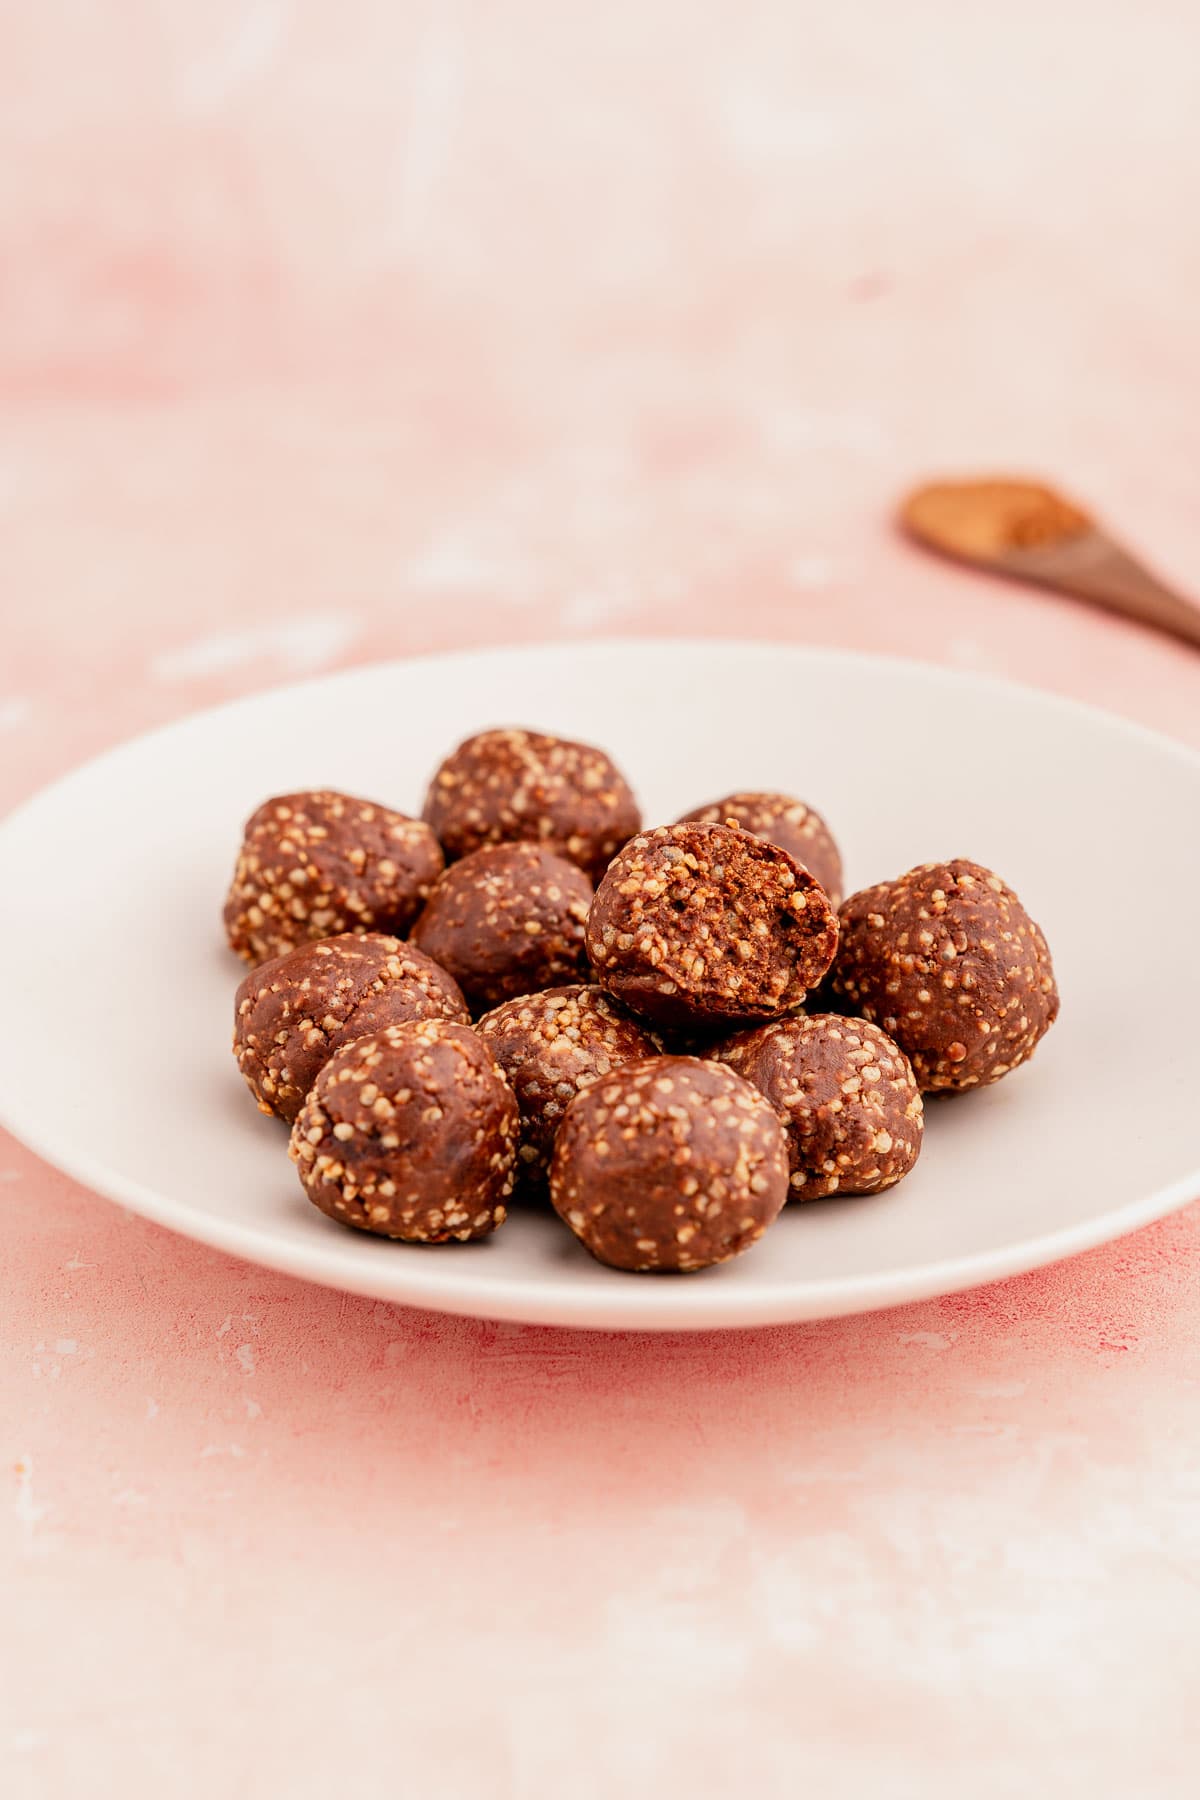 A white plate with homemade quinoa crunch bites sprinkled with seeds, on a pink surface with a wooden spoon in the background.